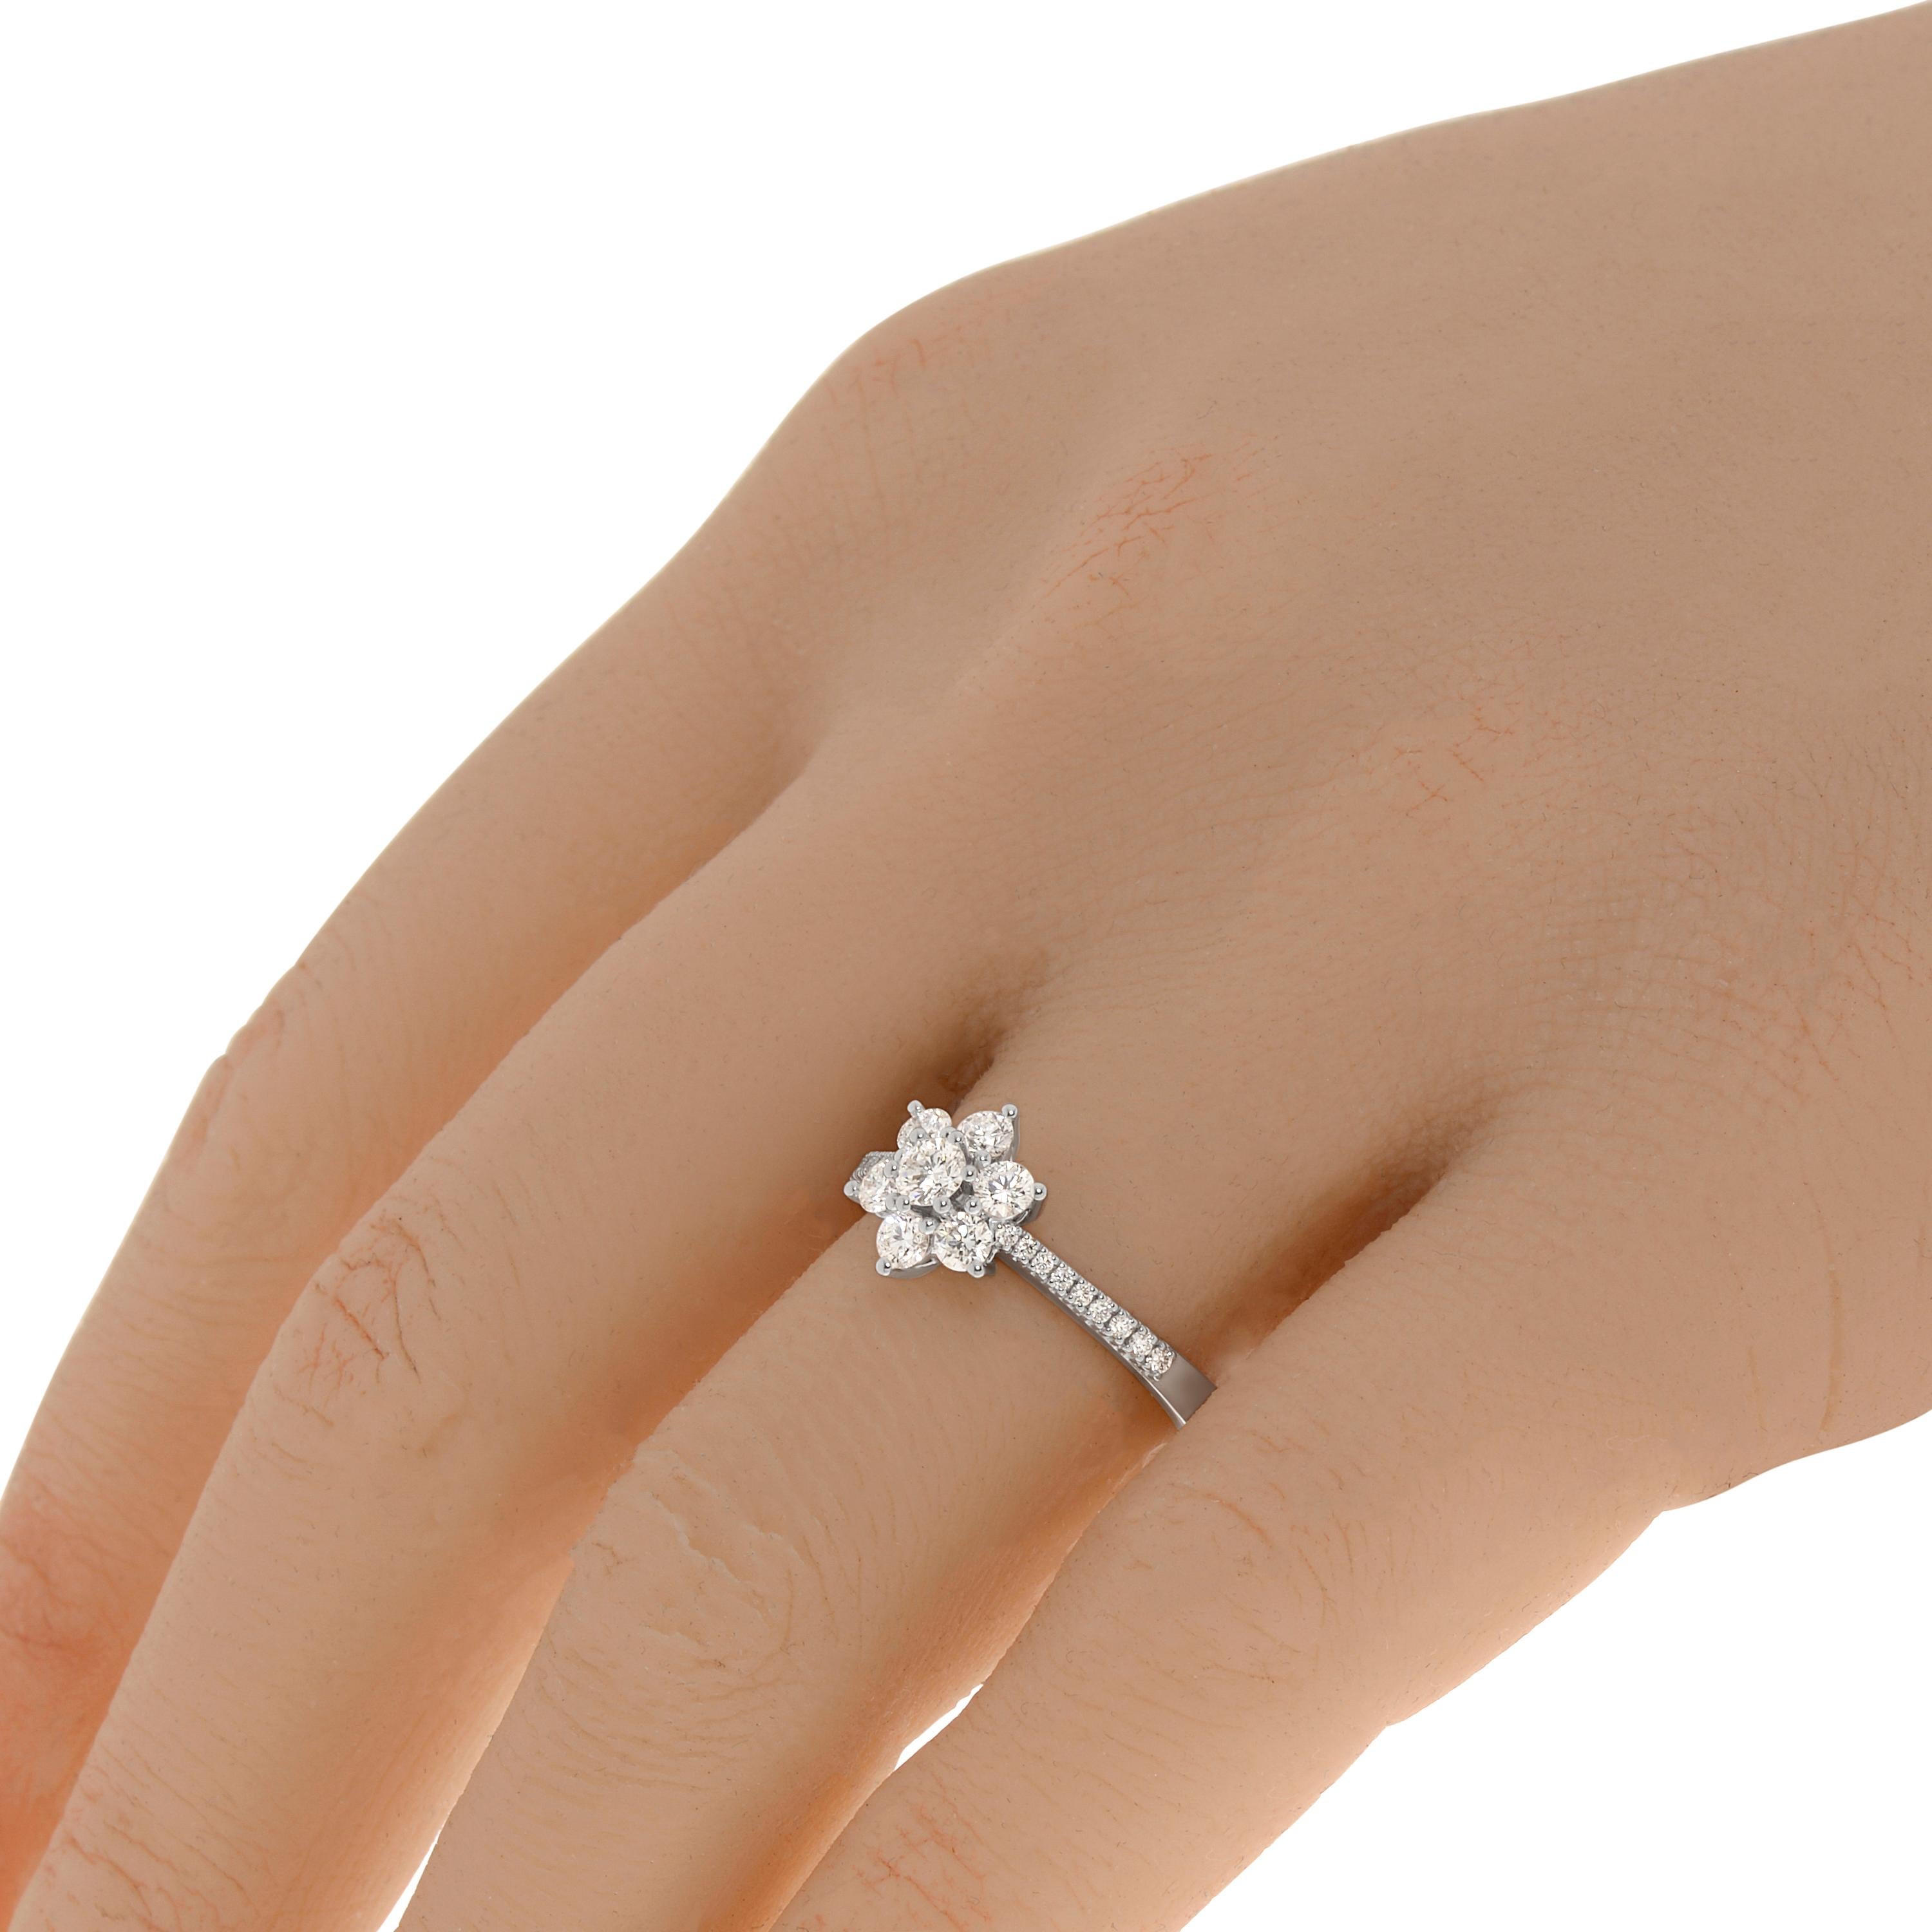 Damiani 18K white gold statement ring features a clustered 0.64ct. tw. diamond flower. The ring size is 6.25 (52.6). The decoration size is 9.5mm. The total weight is 4.2g.
